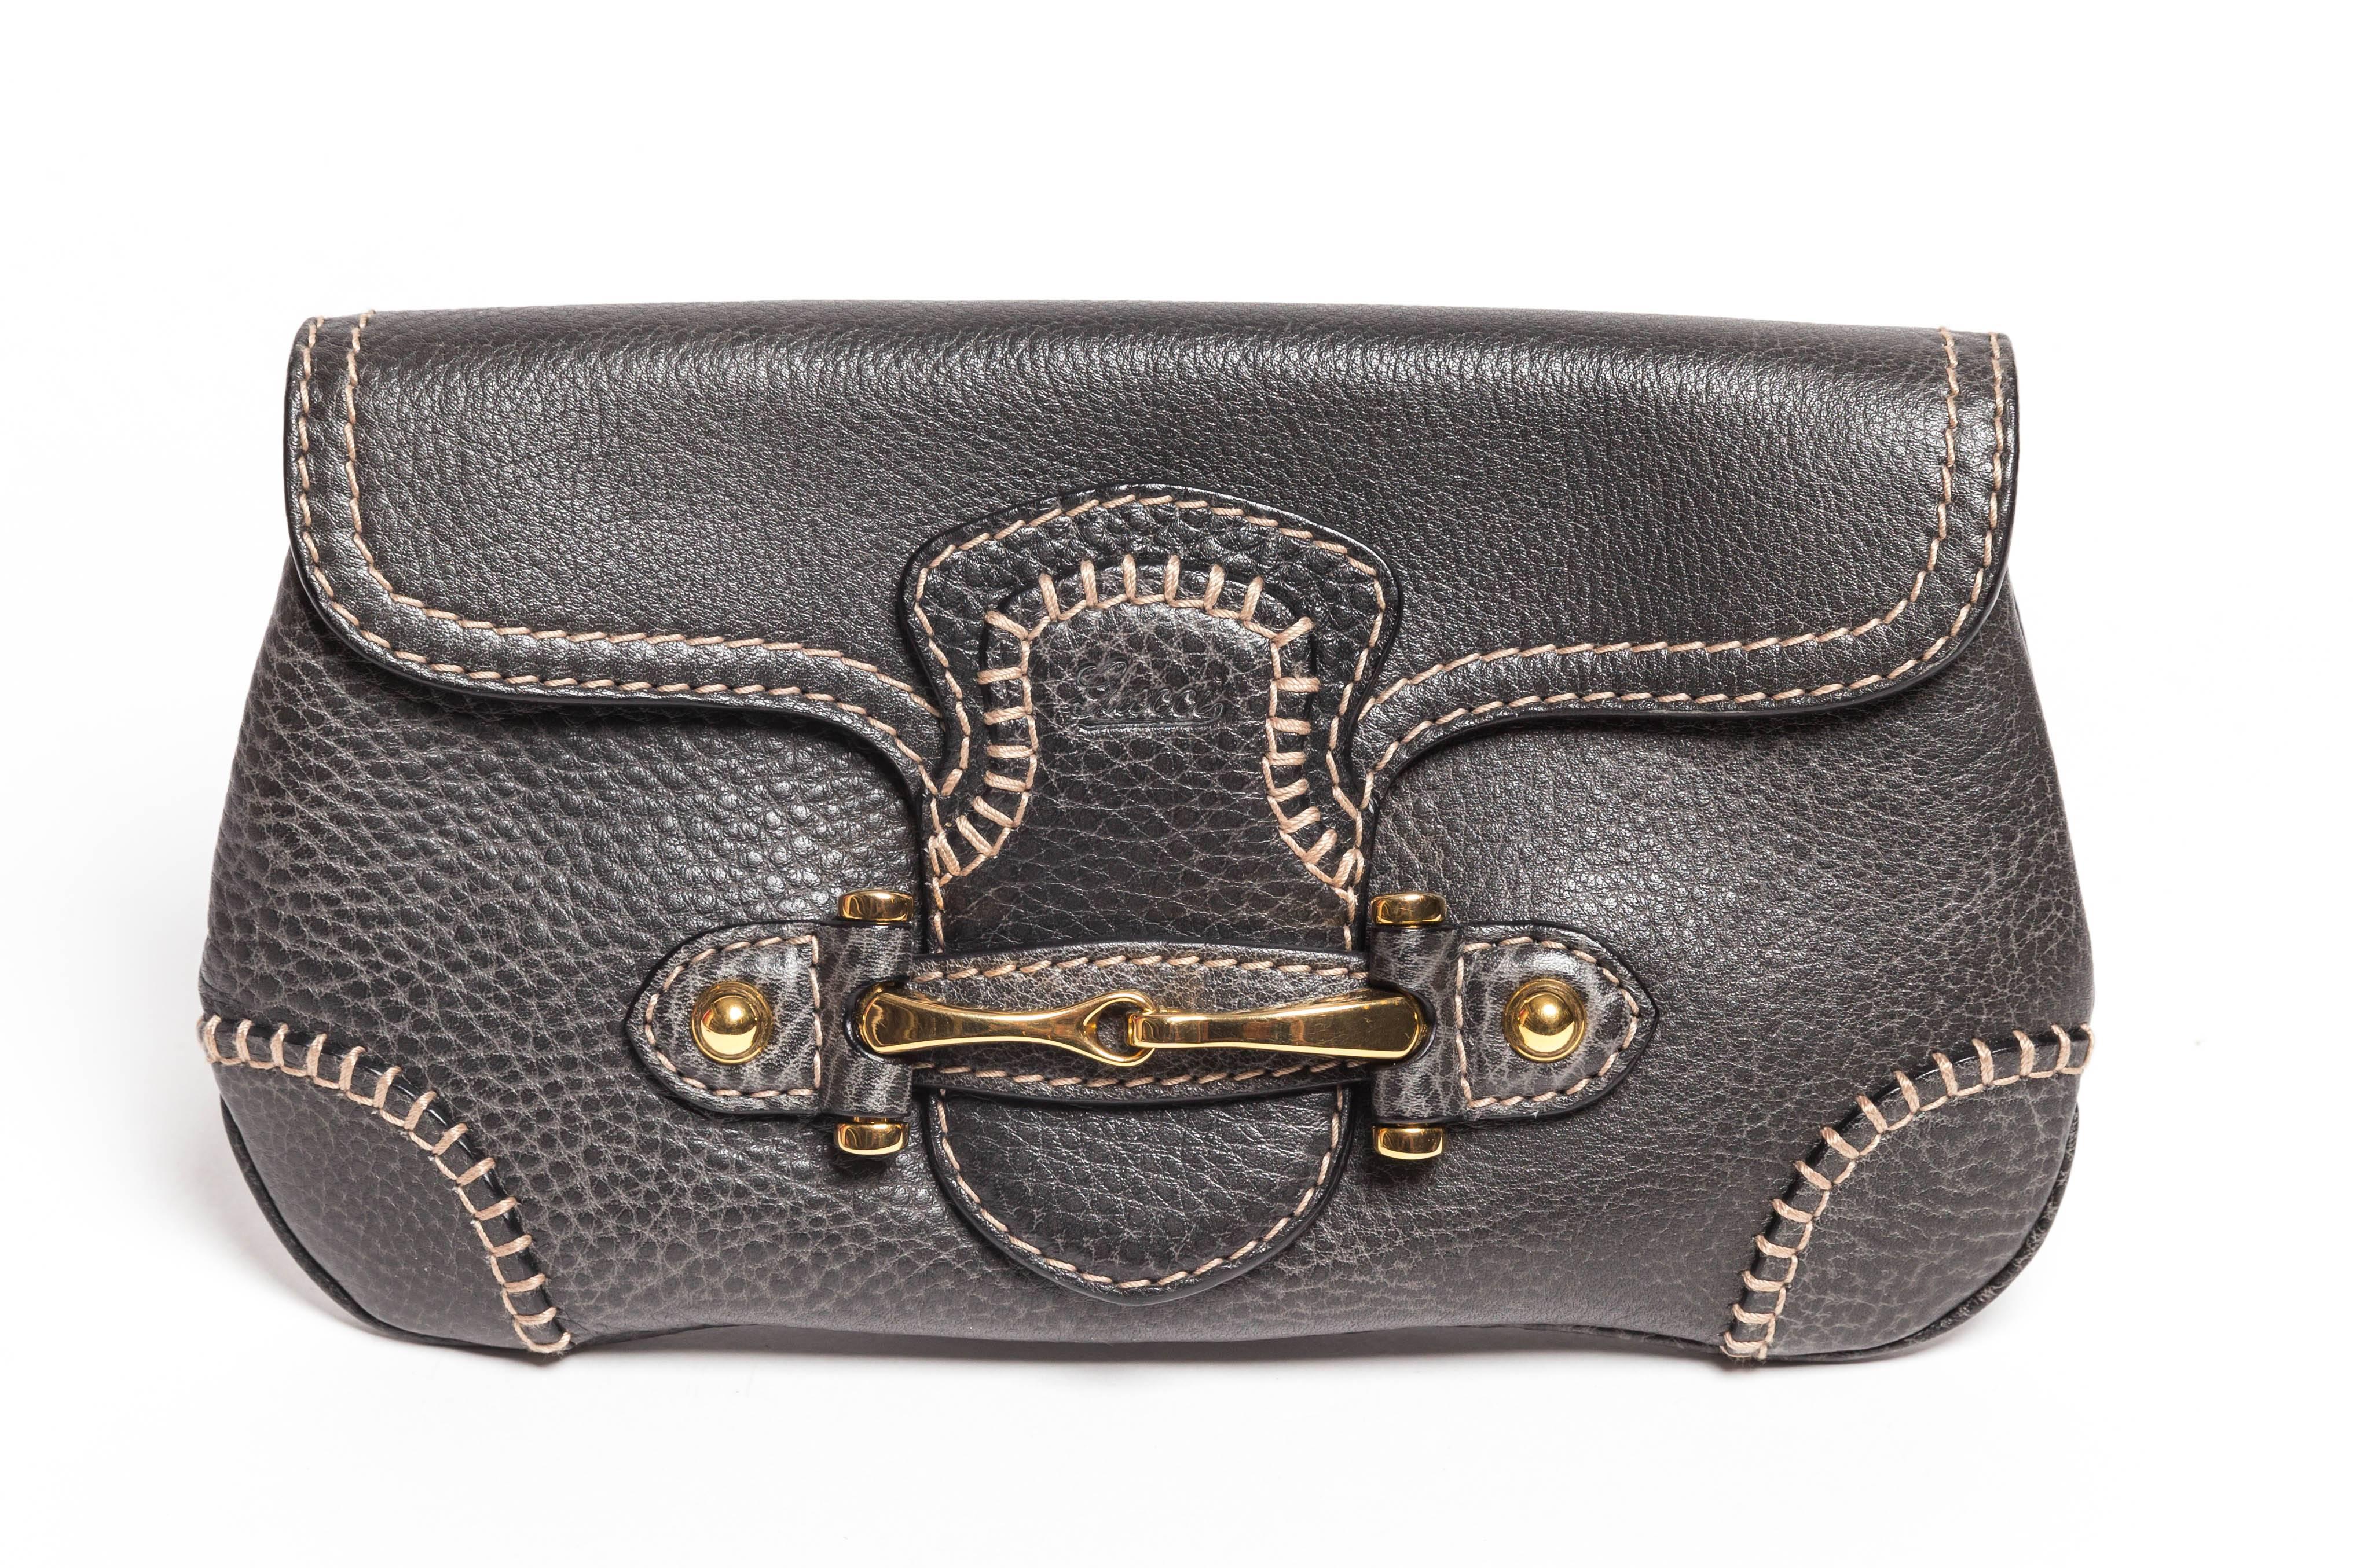  Pebbled Leather Gucci Clutch in Graphite Grey 6